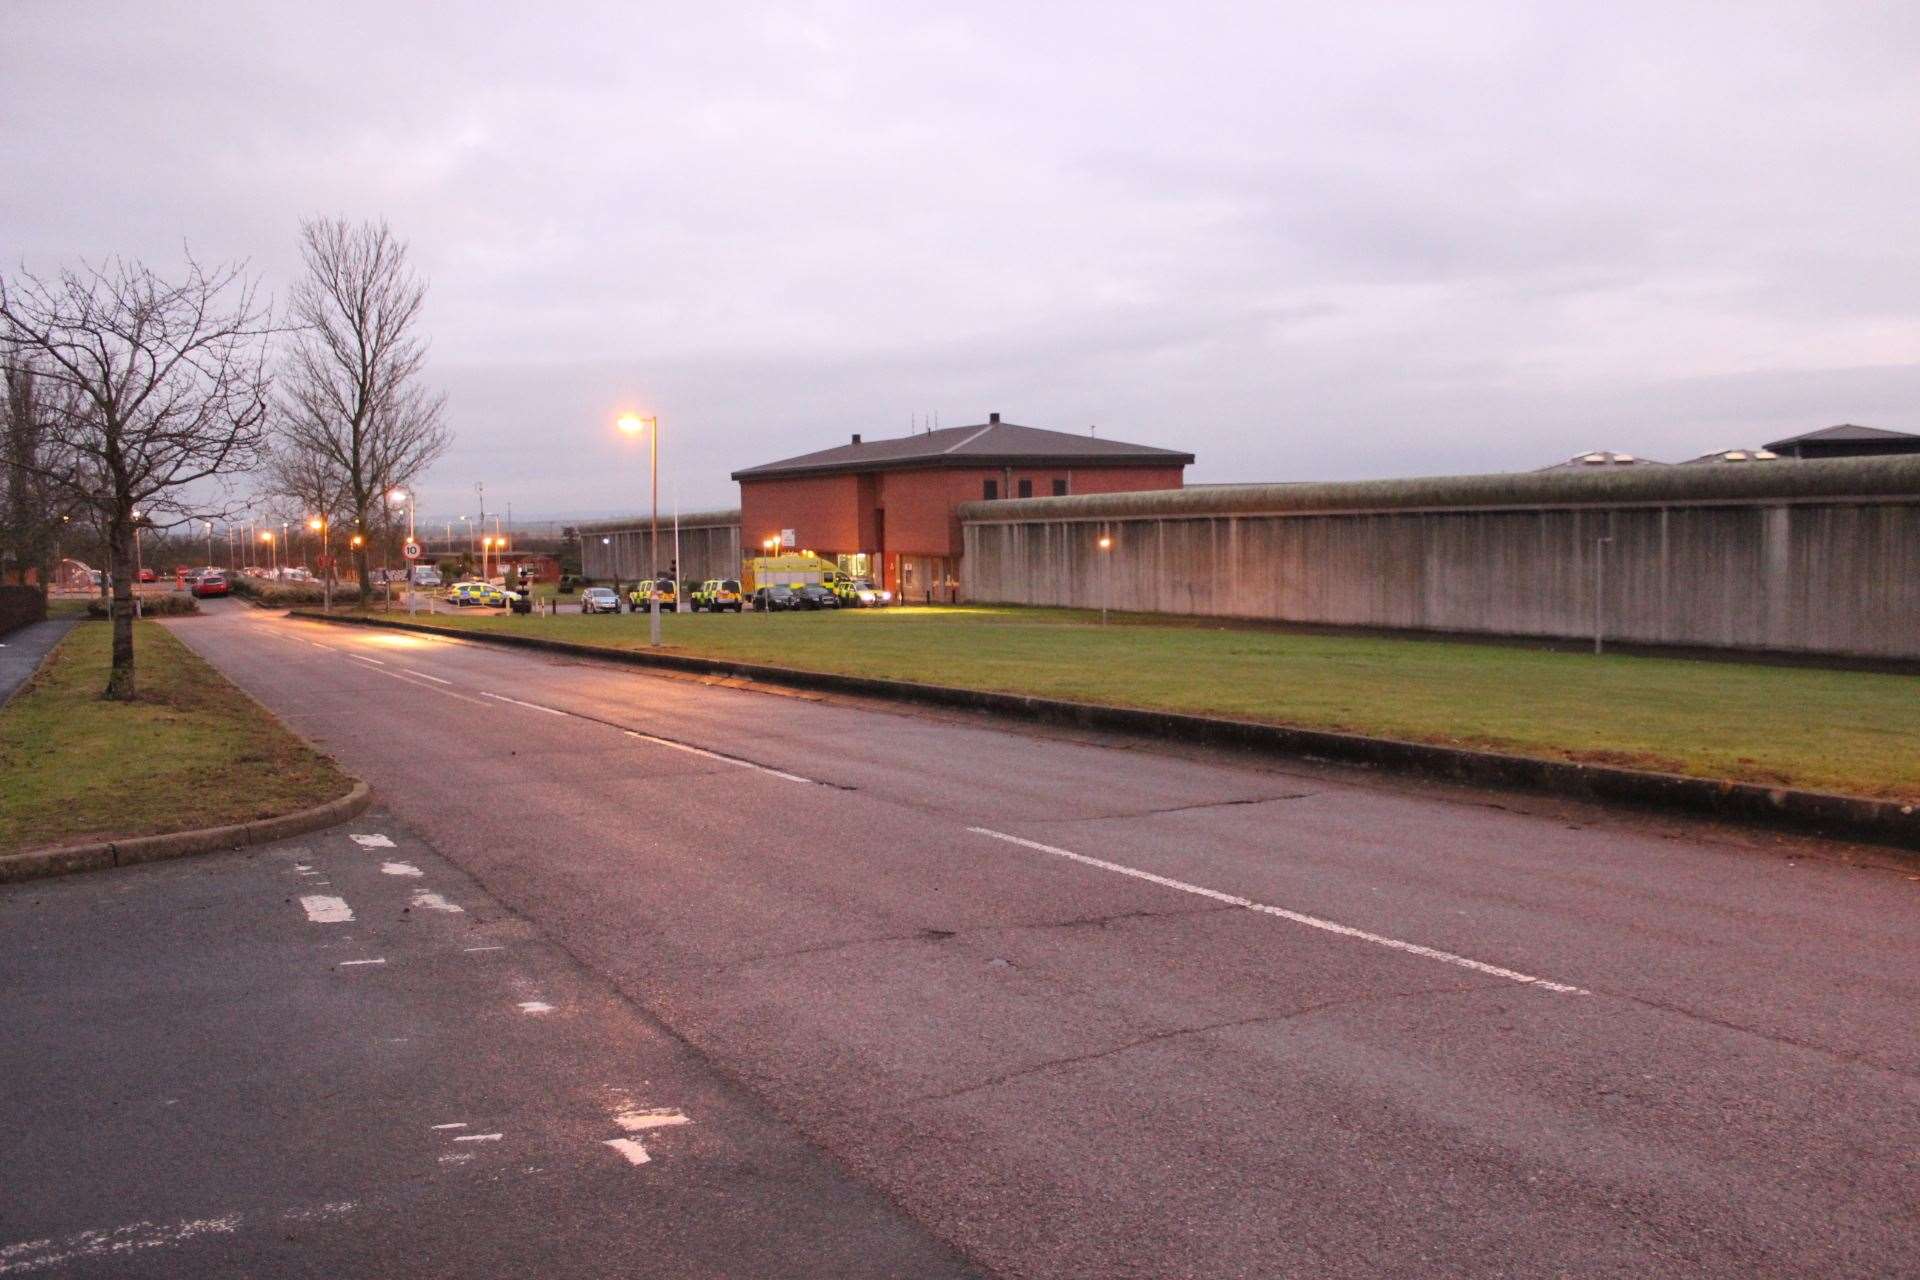 Swaleside prison on the Isle of Sheppey